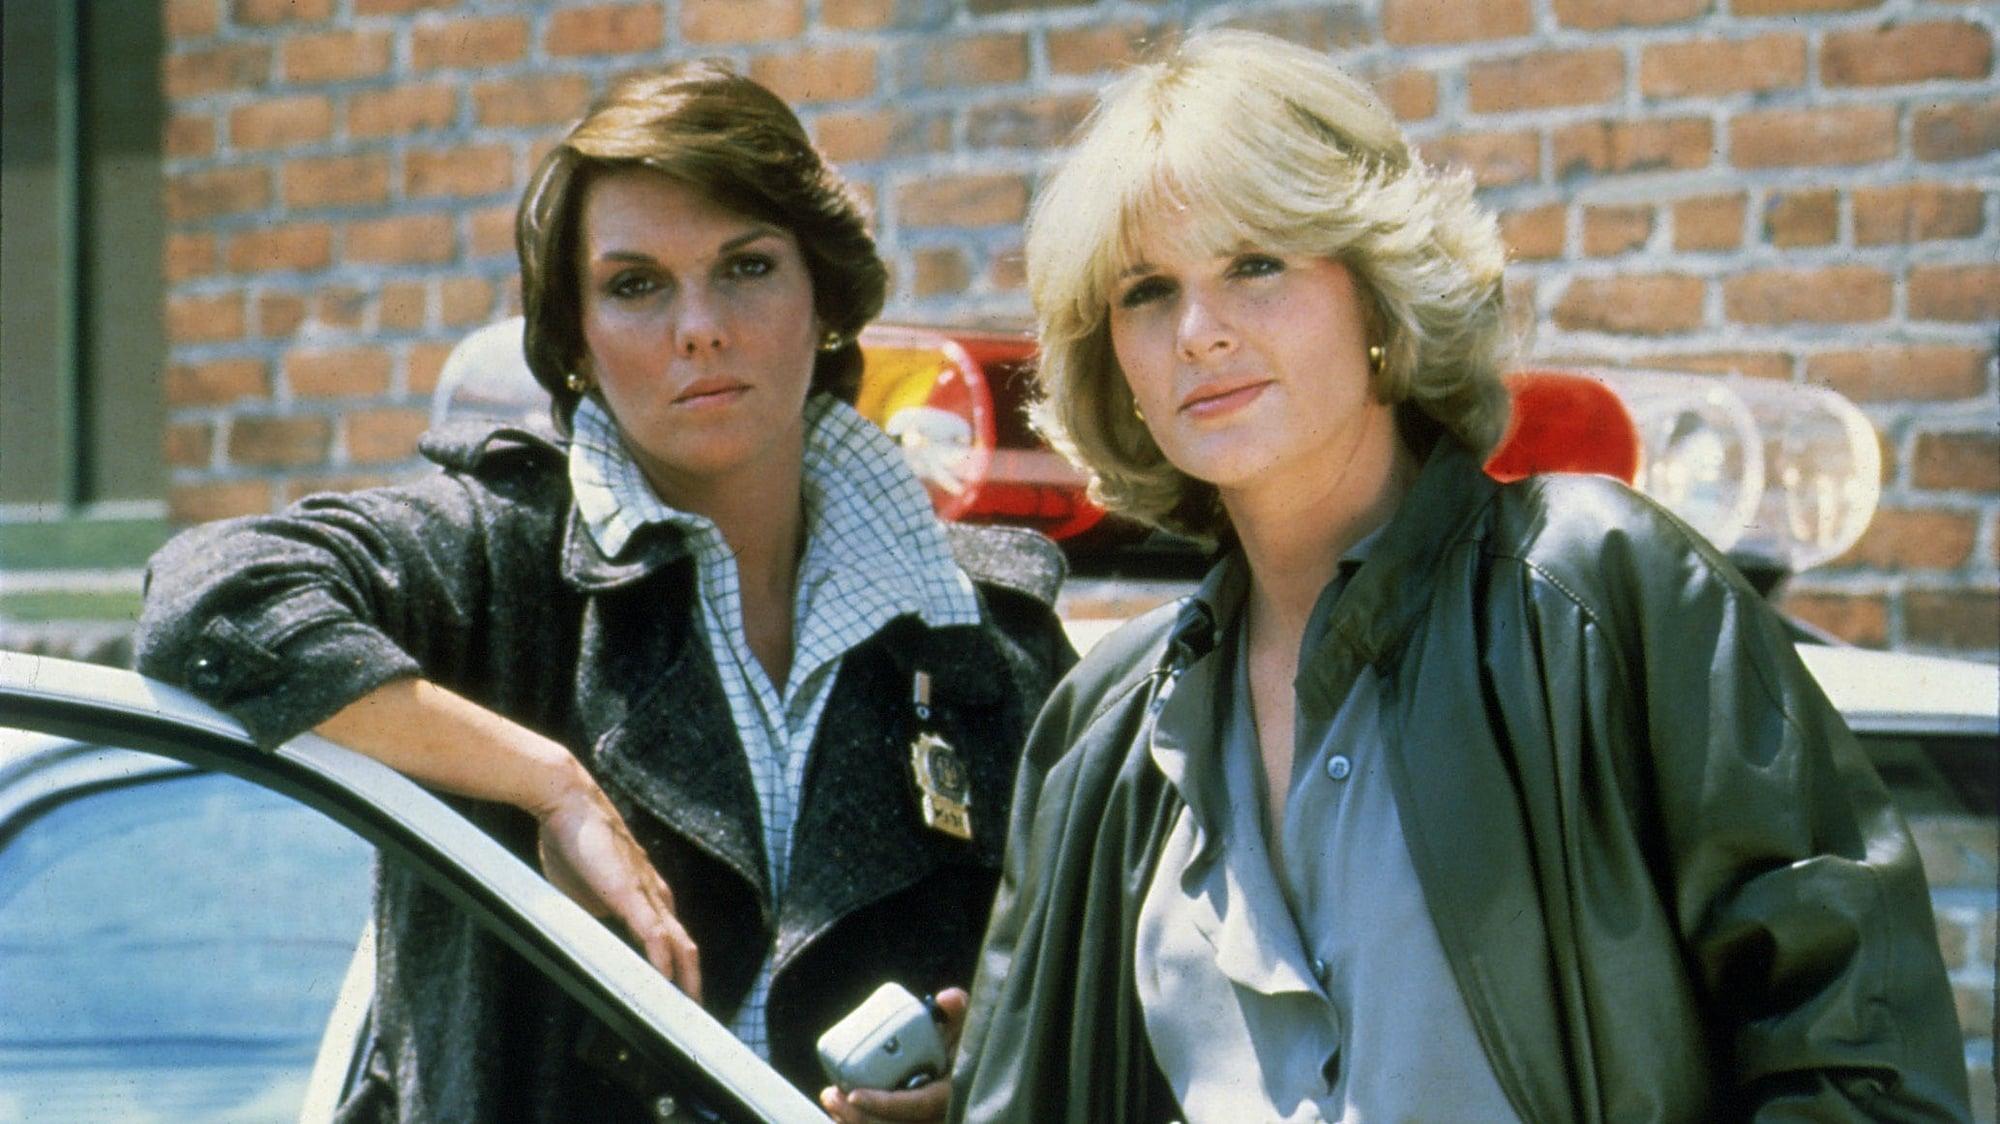 Cagney & Lacey backdrop